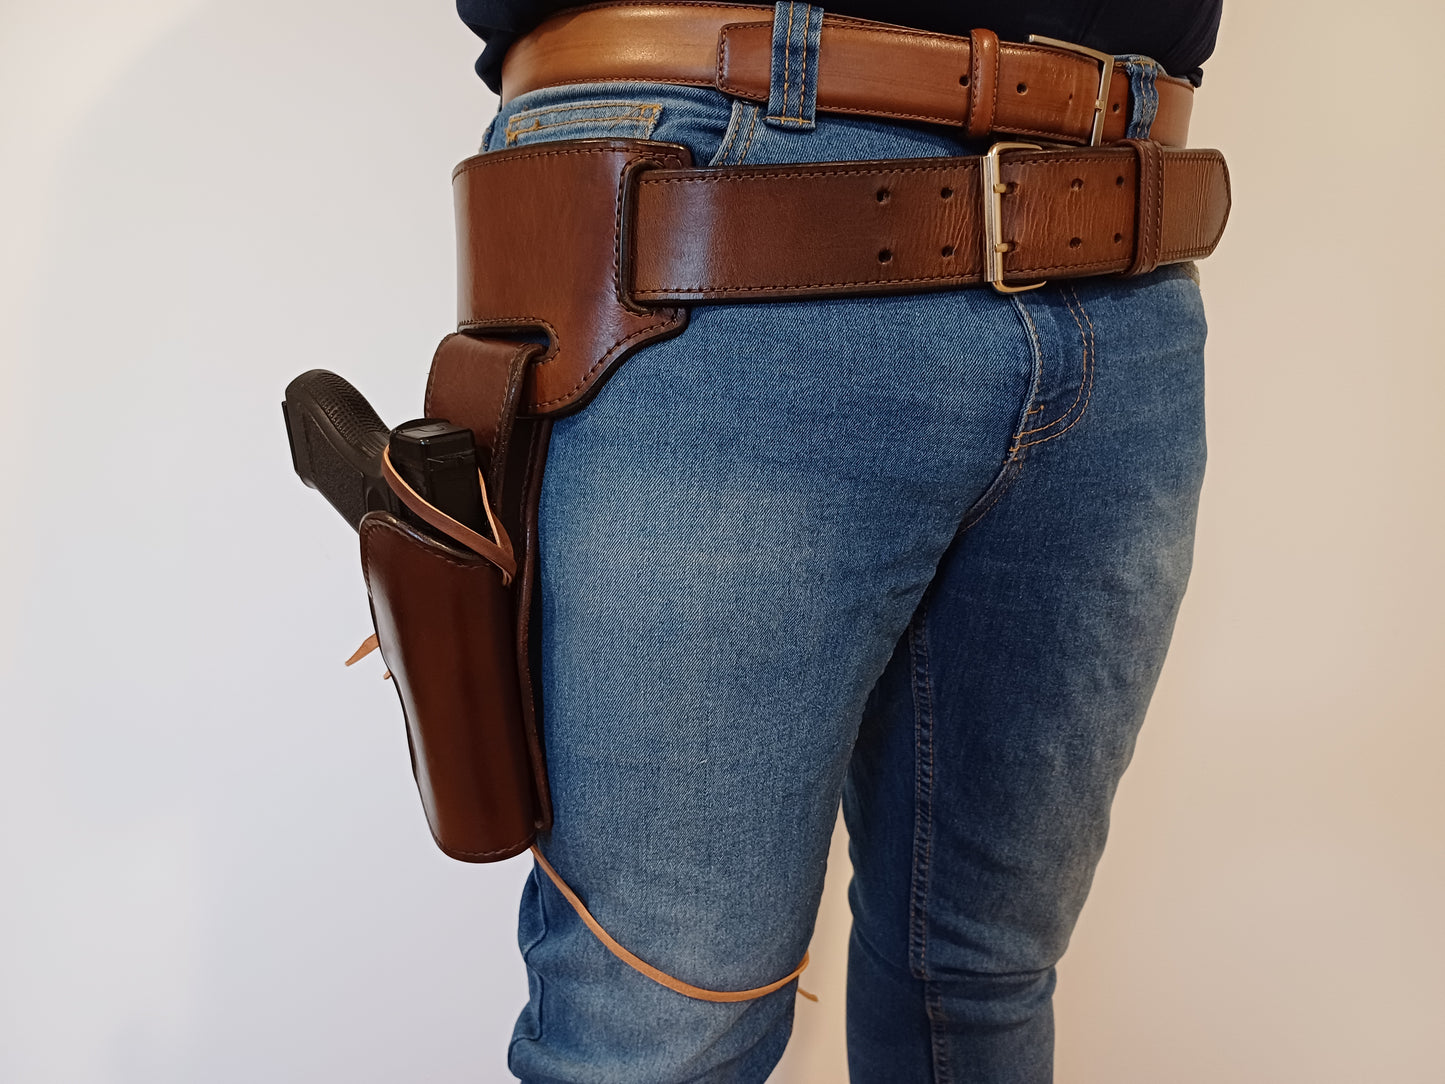 Leather Holster for Glock 17, 19, 21 Western style with leg tie (Made to order)